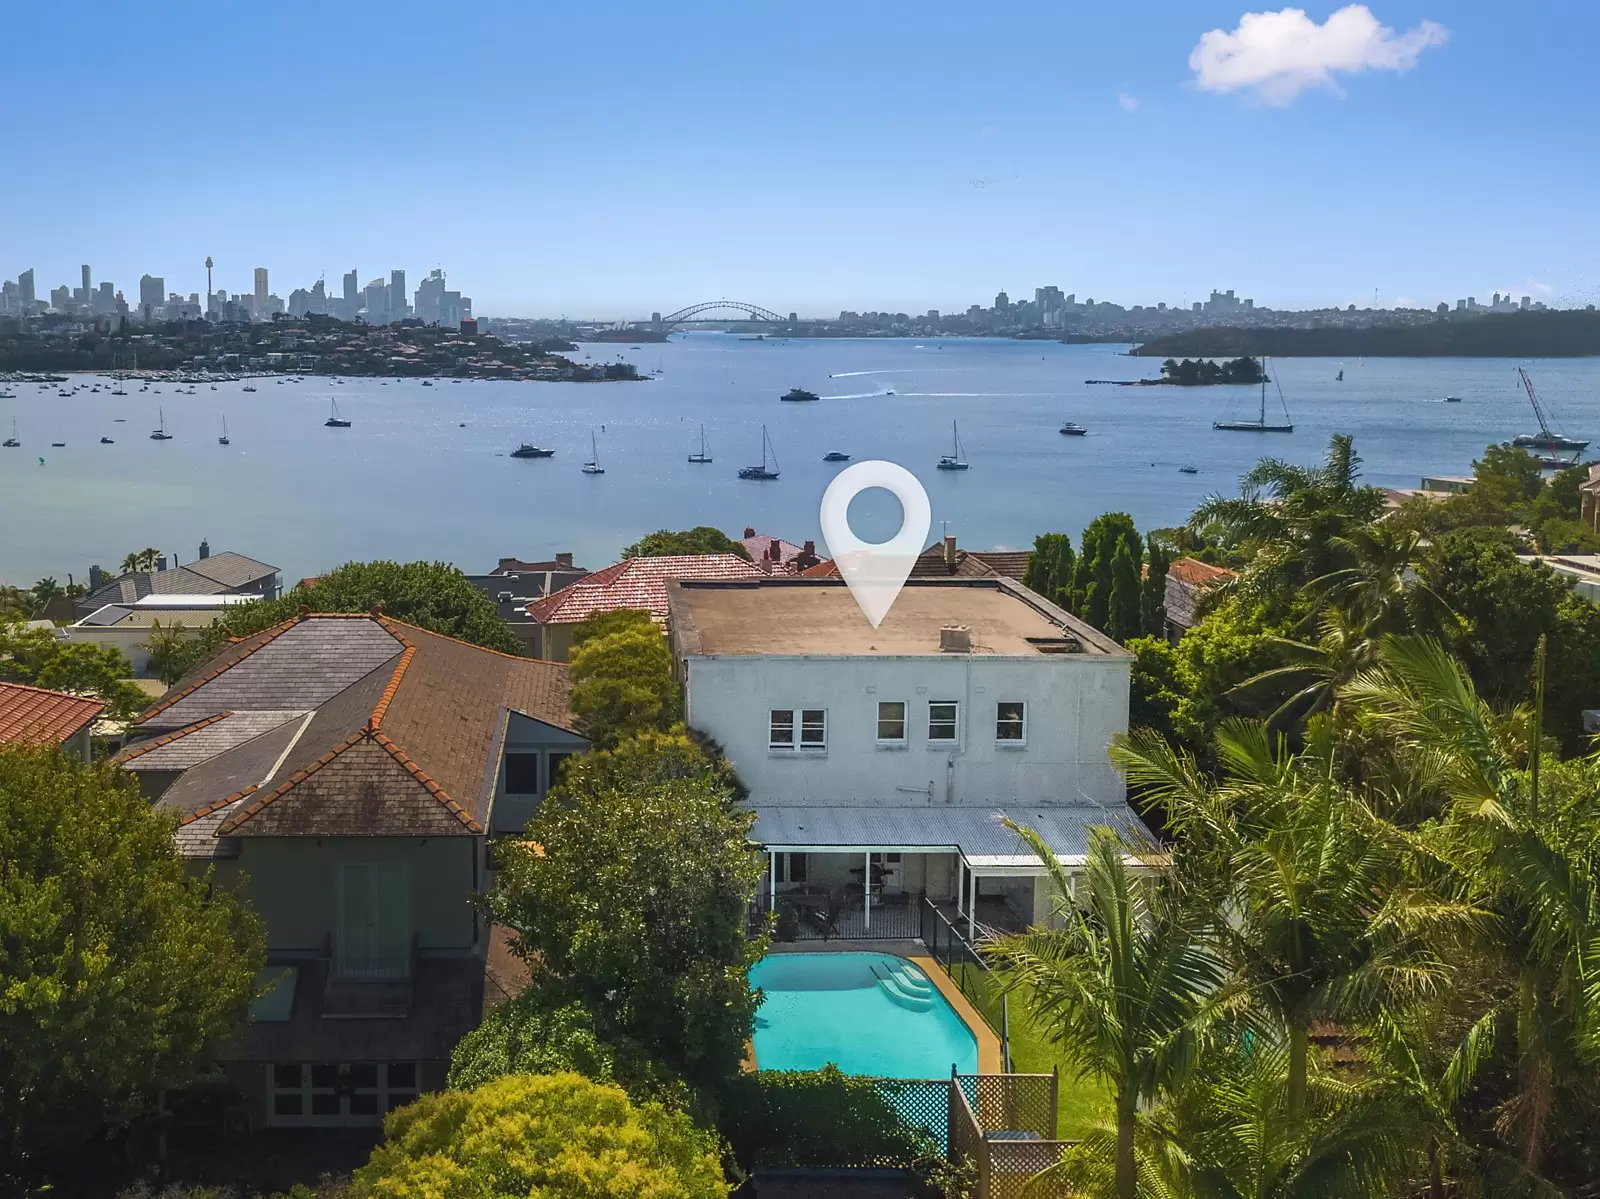 Photo #4: 12 Rawson Road, Rose Bay - Sold by Sydney Sotheby's International Realty